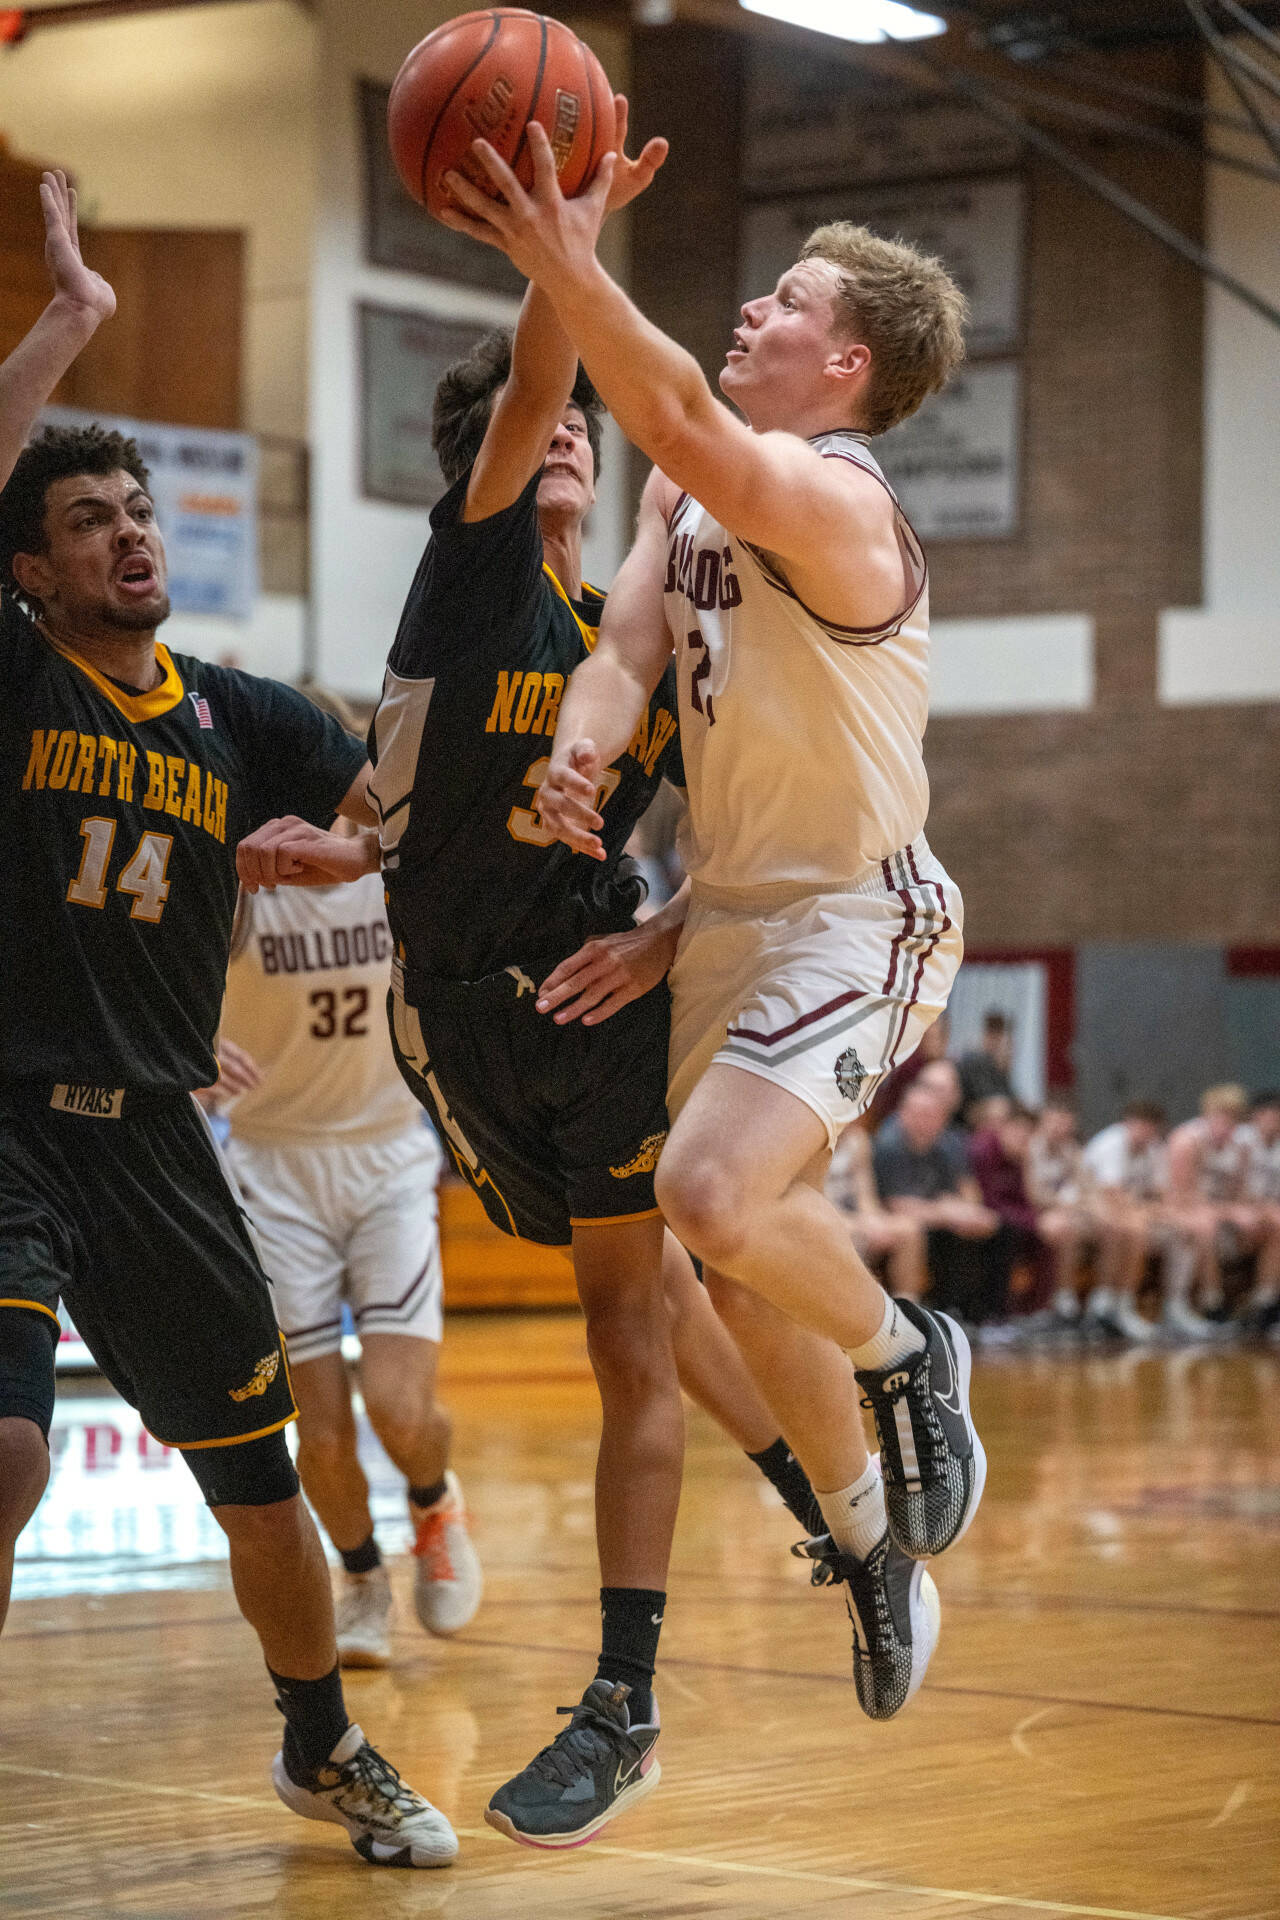 PHOTO BY FOREST WORGUM Montesano’s Tyce Peterson, right, puts up a shot against North Beach’s Jeremiah Eastman (30) and Tyrell Hovland (14) during the Bulldogs’ 63-25 win on Tuesday in Montesano.